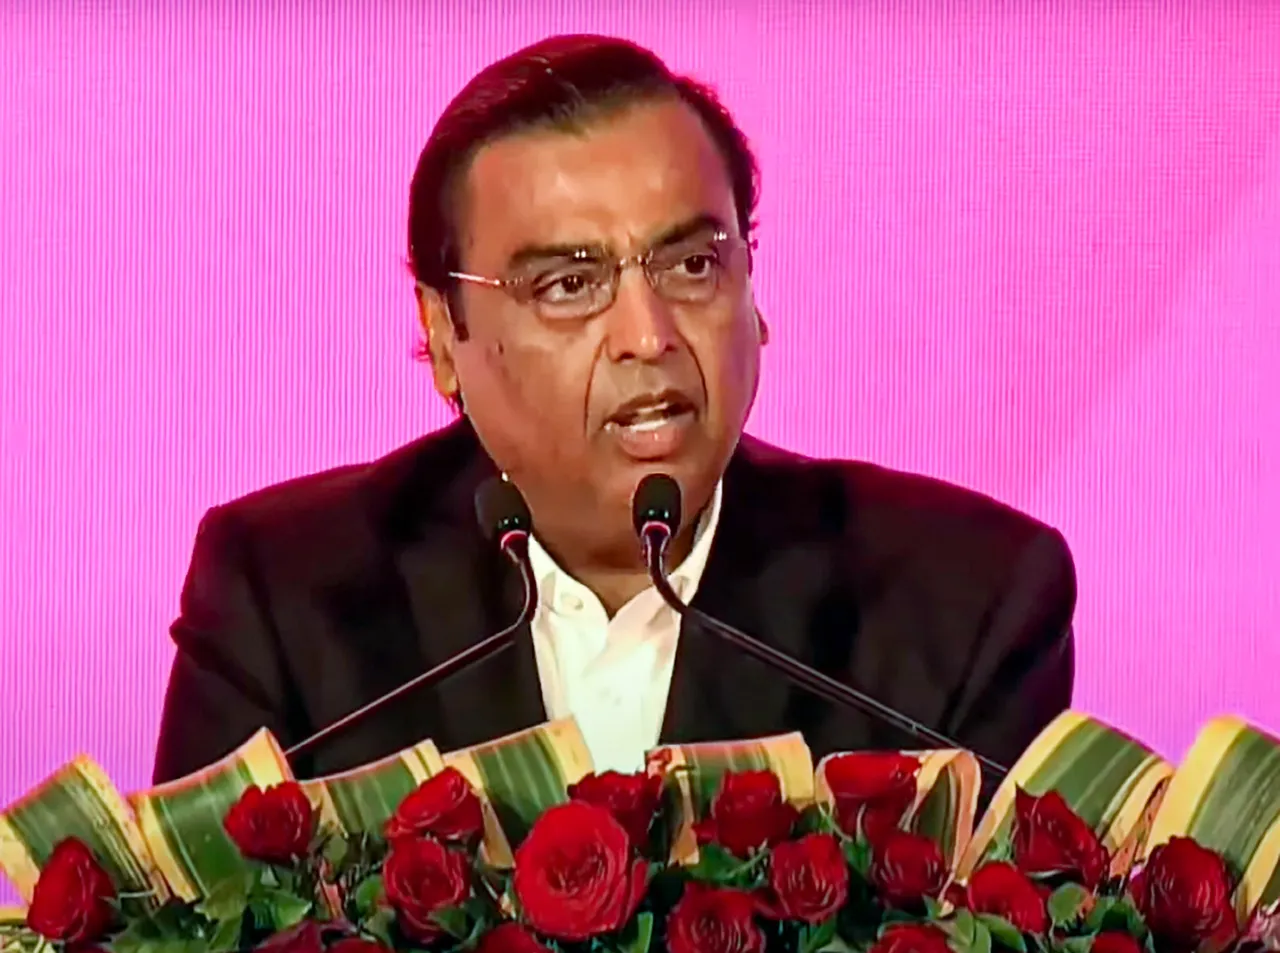 Reliance to invest Rs 75,000 cr in UP in 4 yrs: Mukesh Ambani at UPGIS